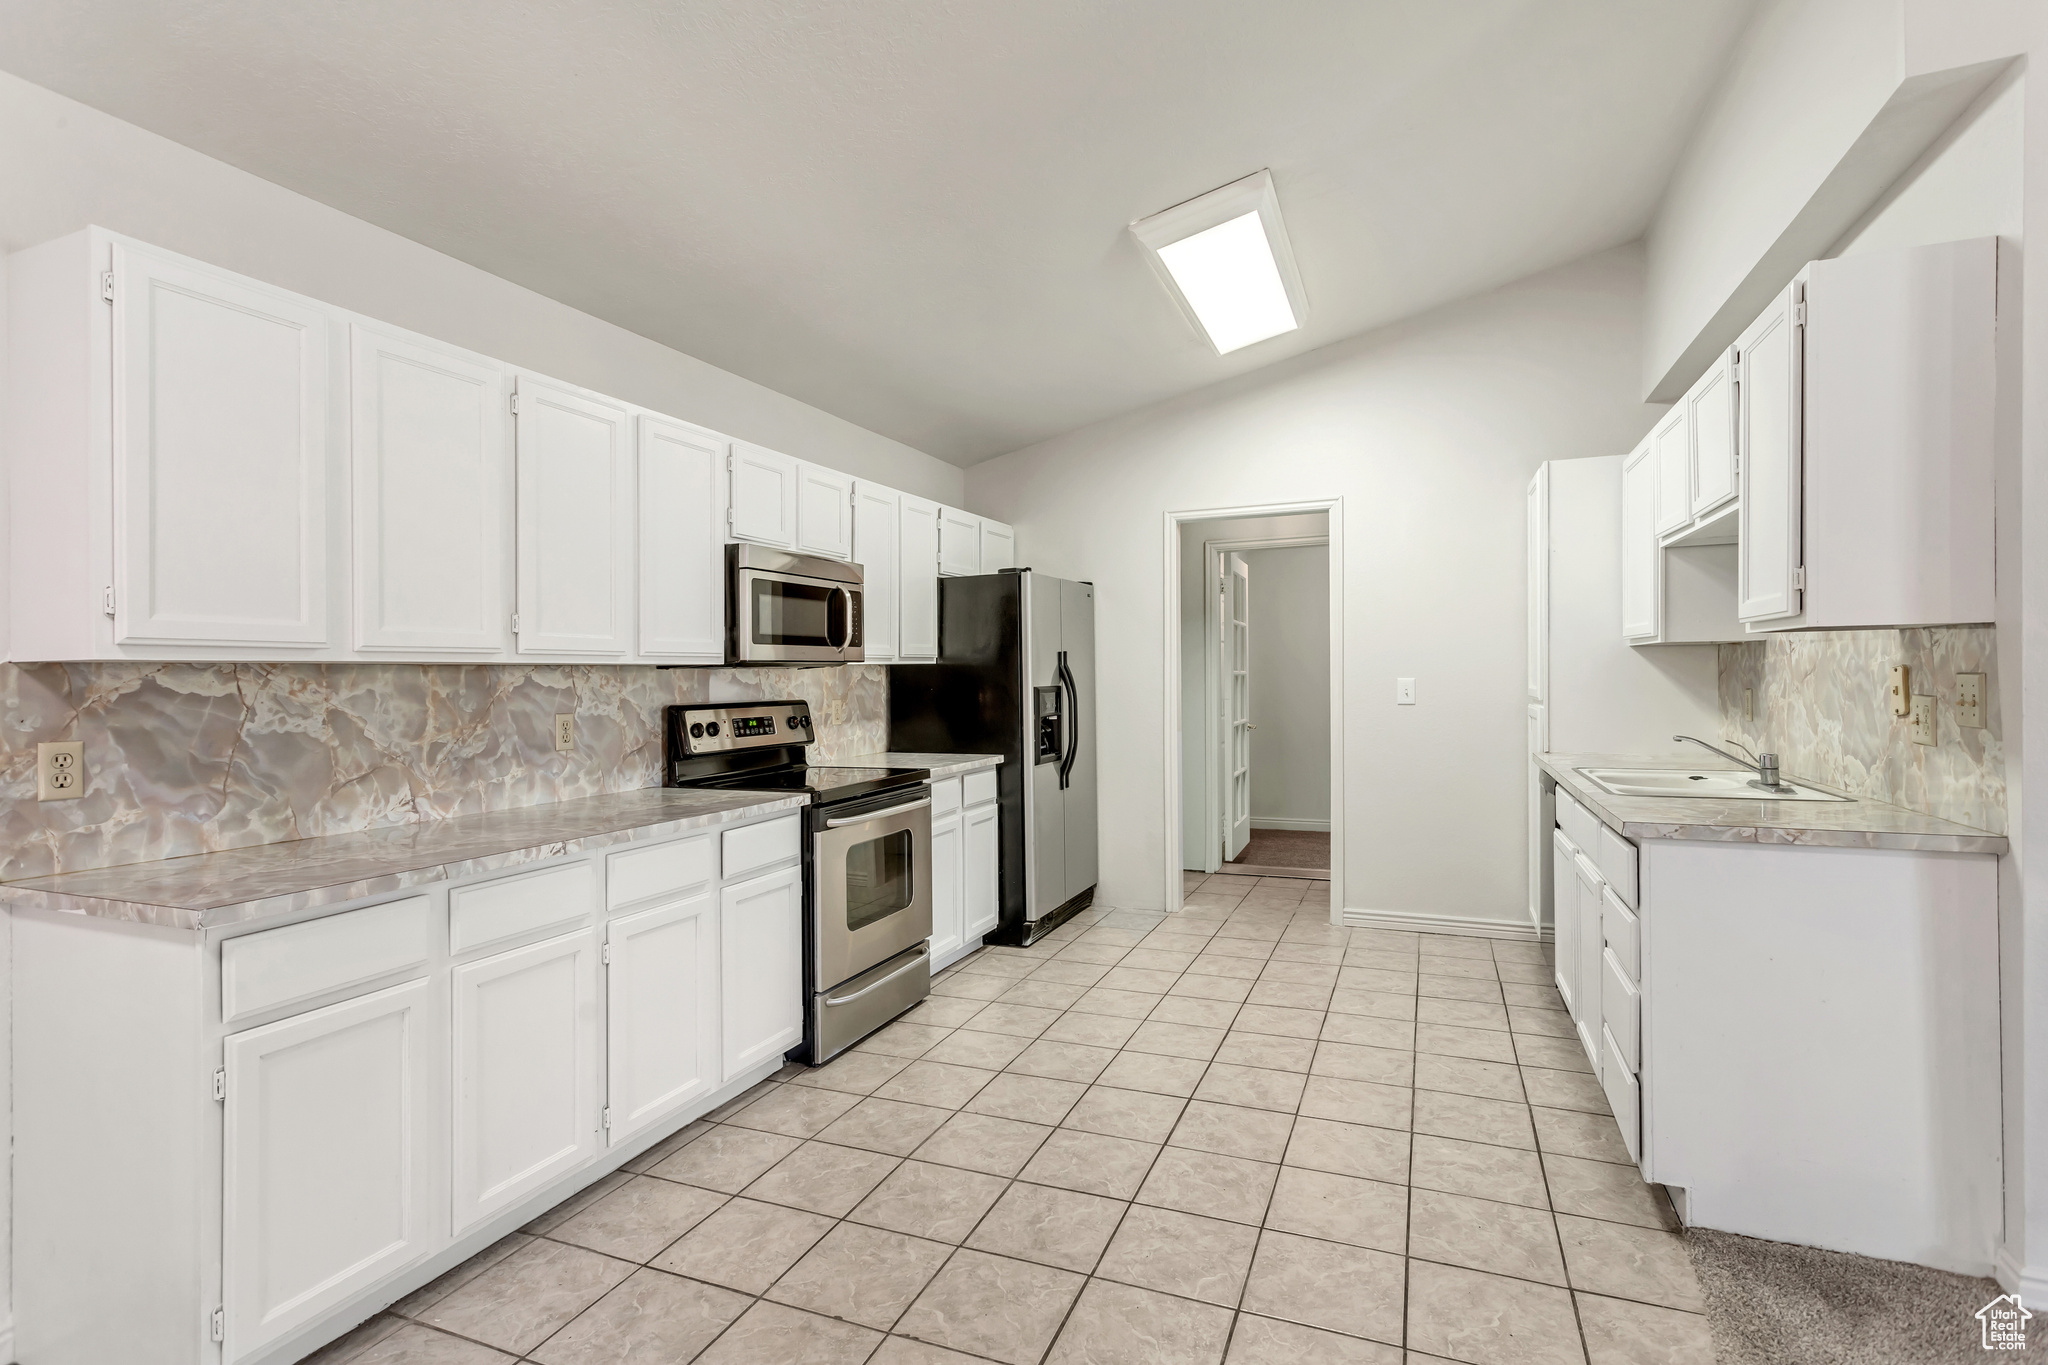 Spacious kitchen featuring white cabinets with lots of counter space and stainless steel appliances